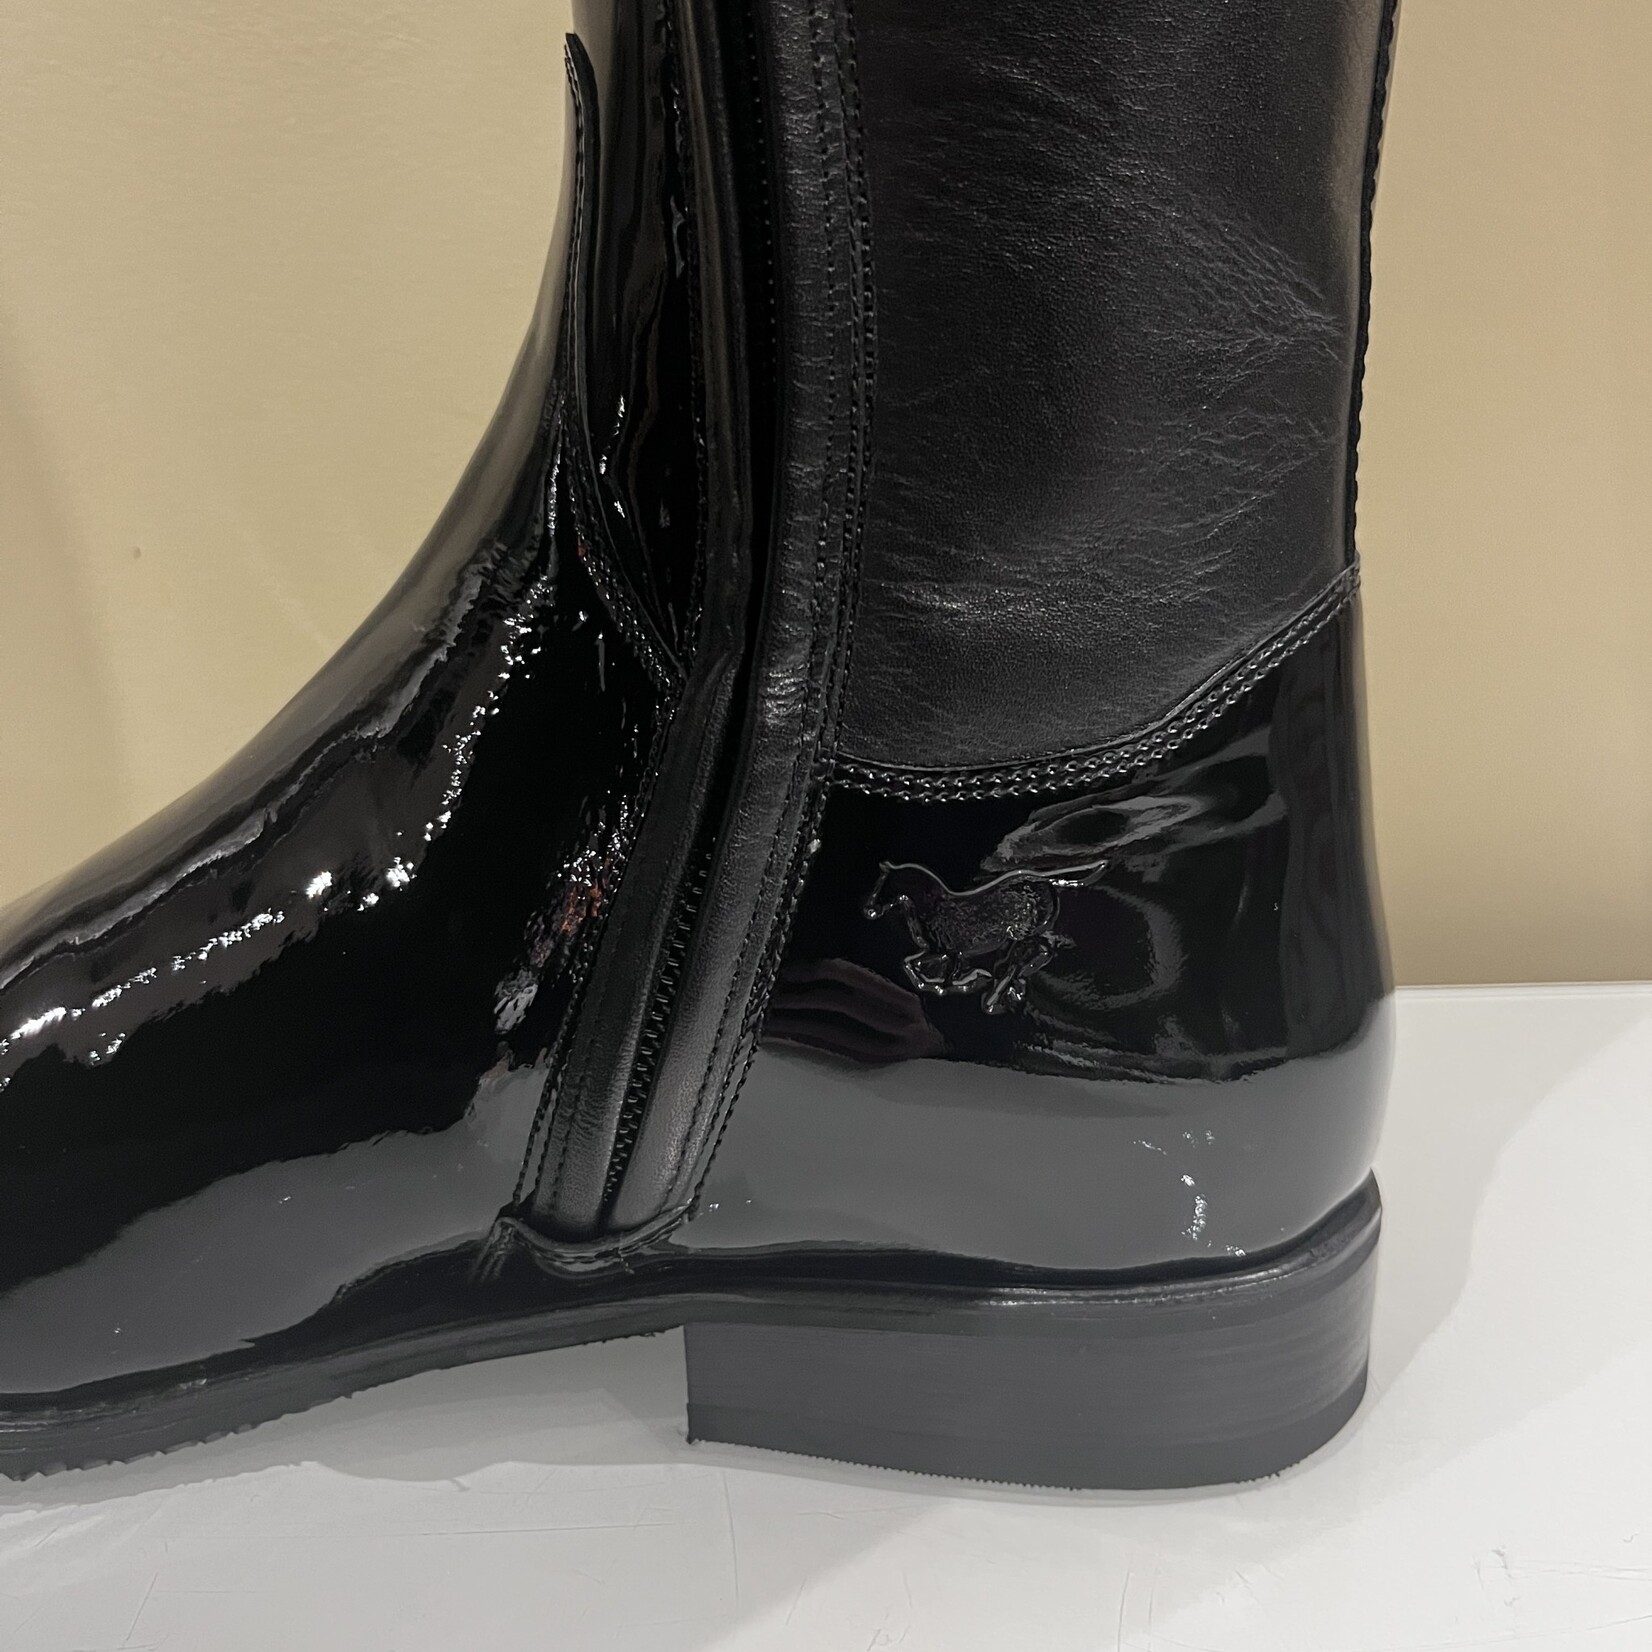 Deniro Boot DeNiro Bellini Patent Black Rondine Top with frame, GGS Cry Fine Rock Crystal Top, 41 foot,  48 height, 36.5 calf